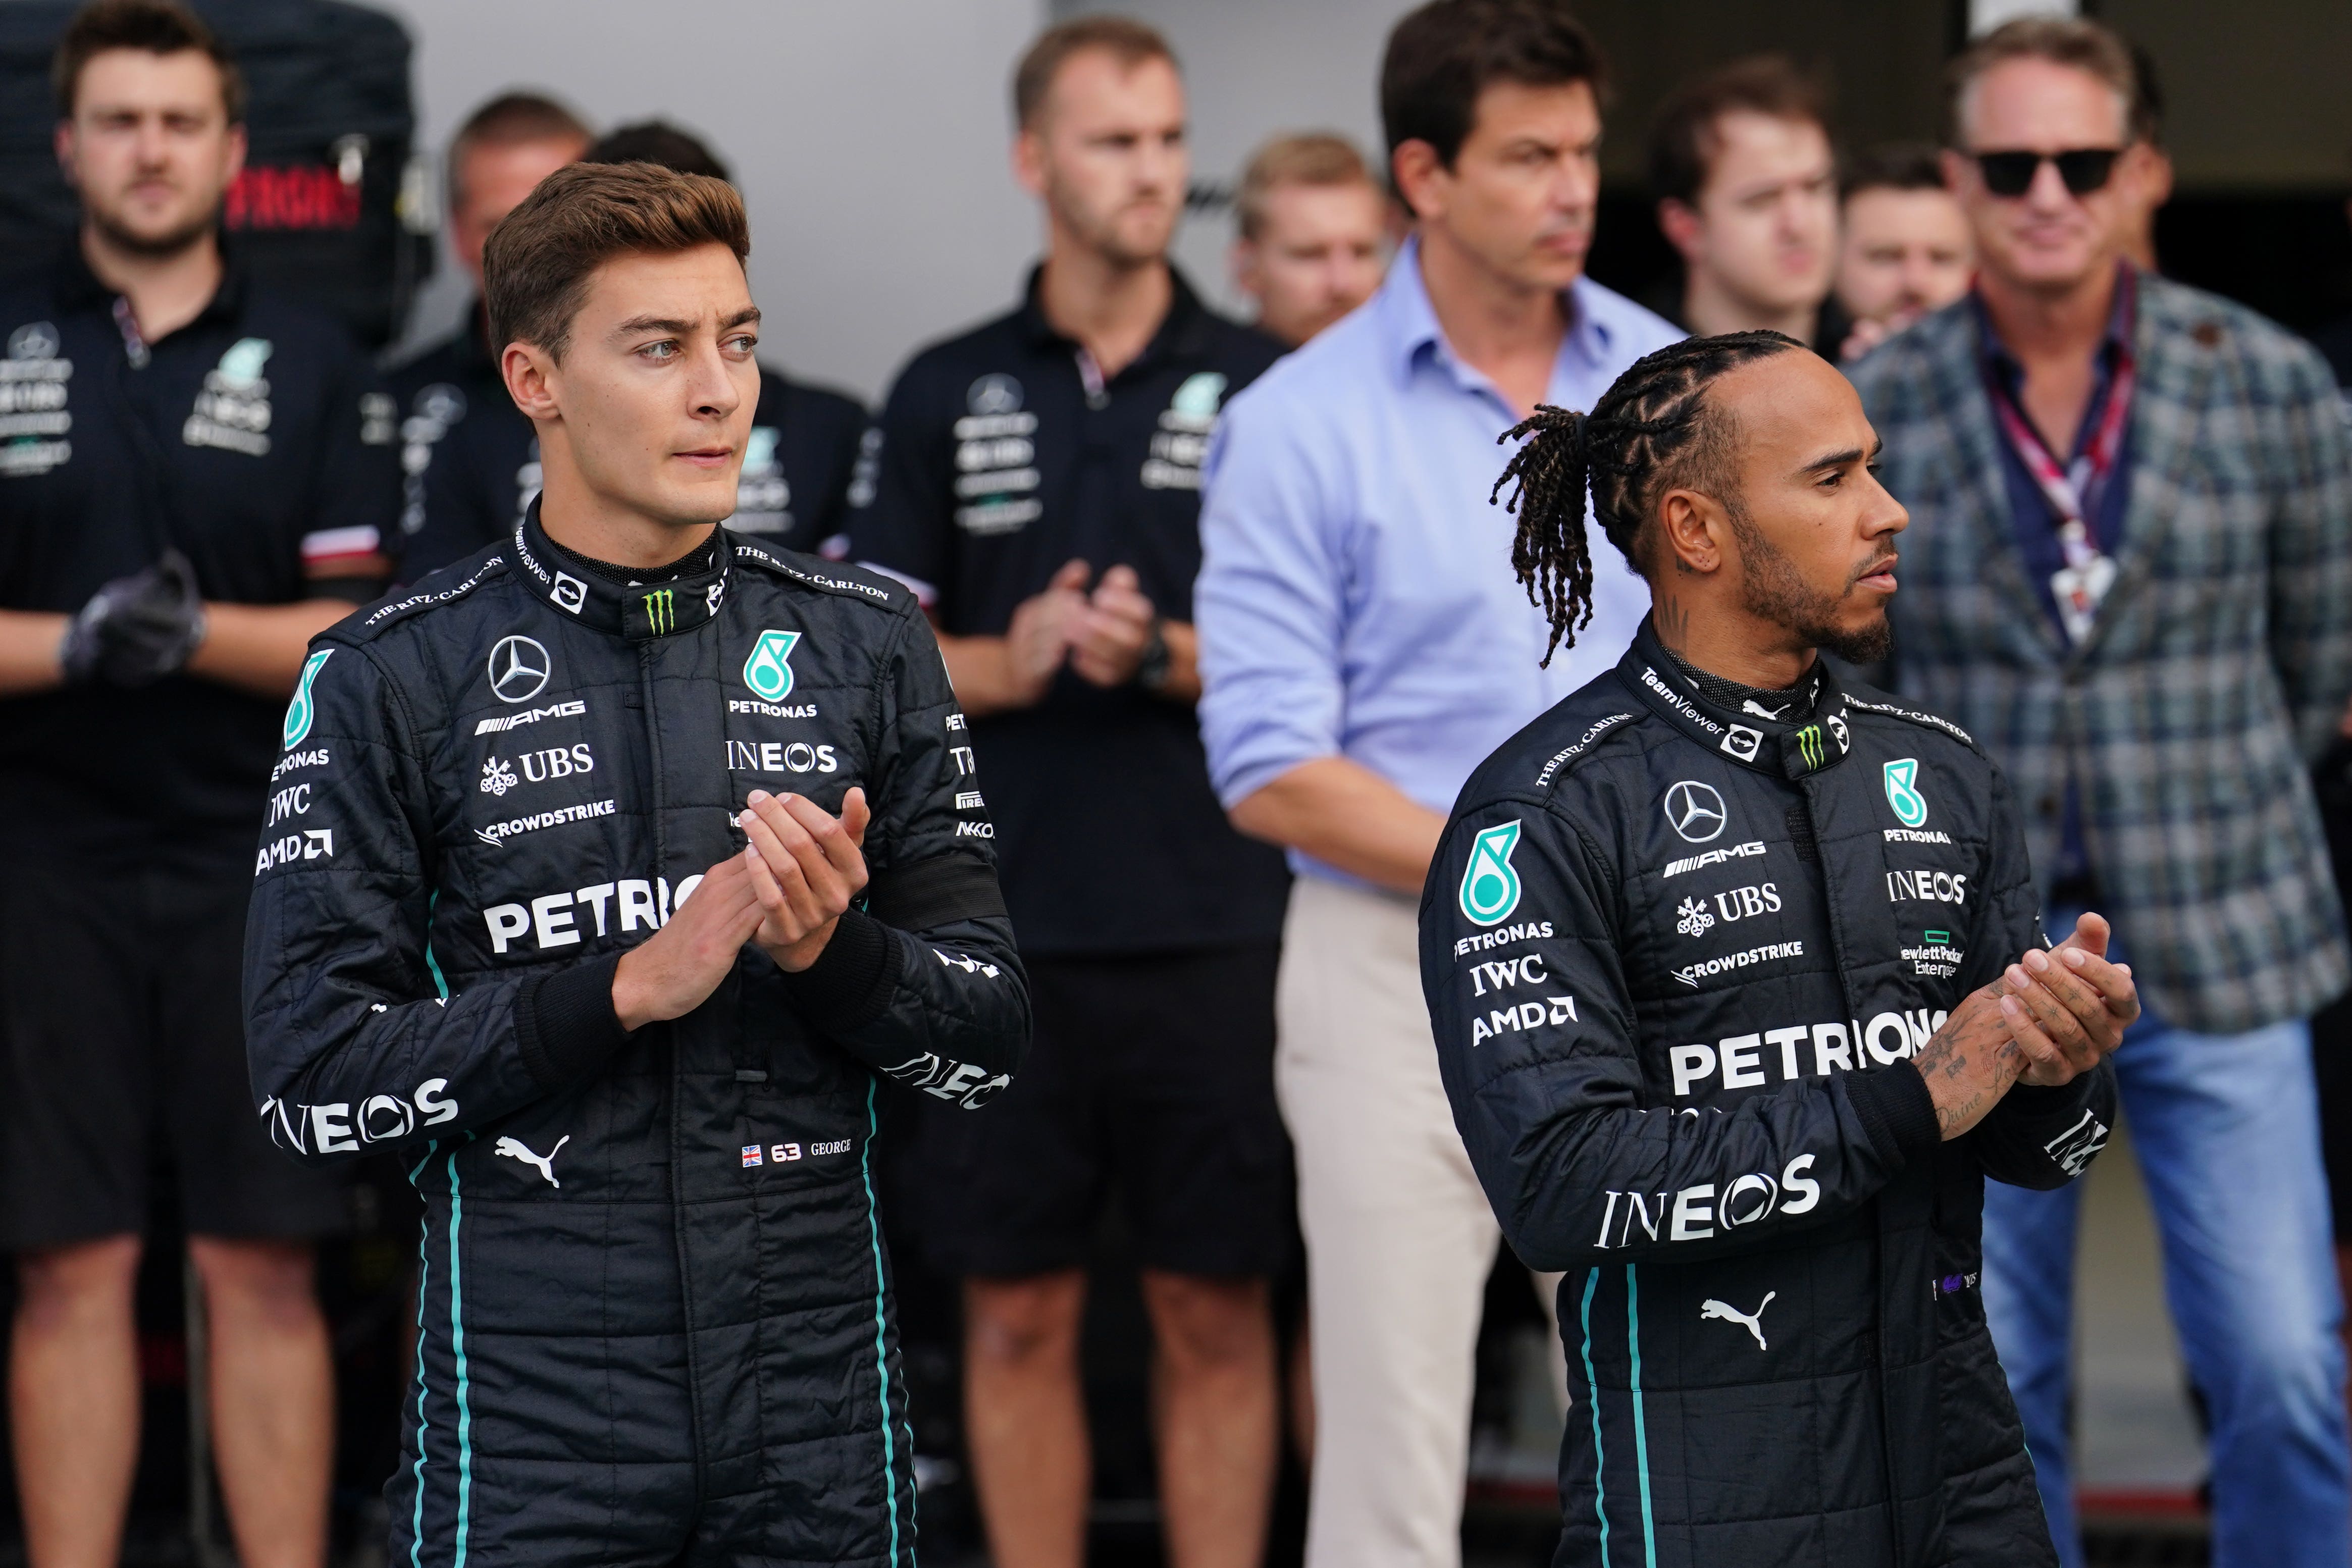 Lewis Hamilton accuses Russell of ‘dangerous’ driving after